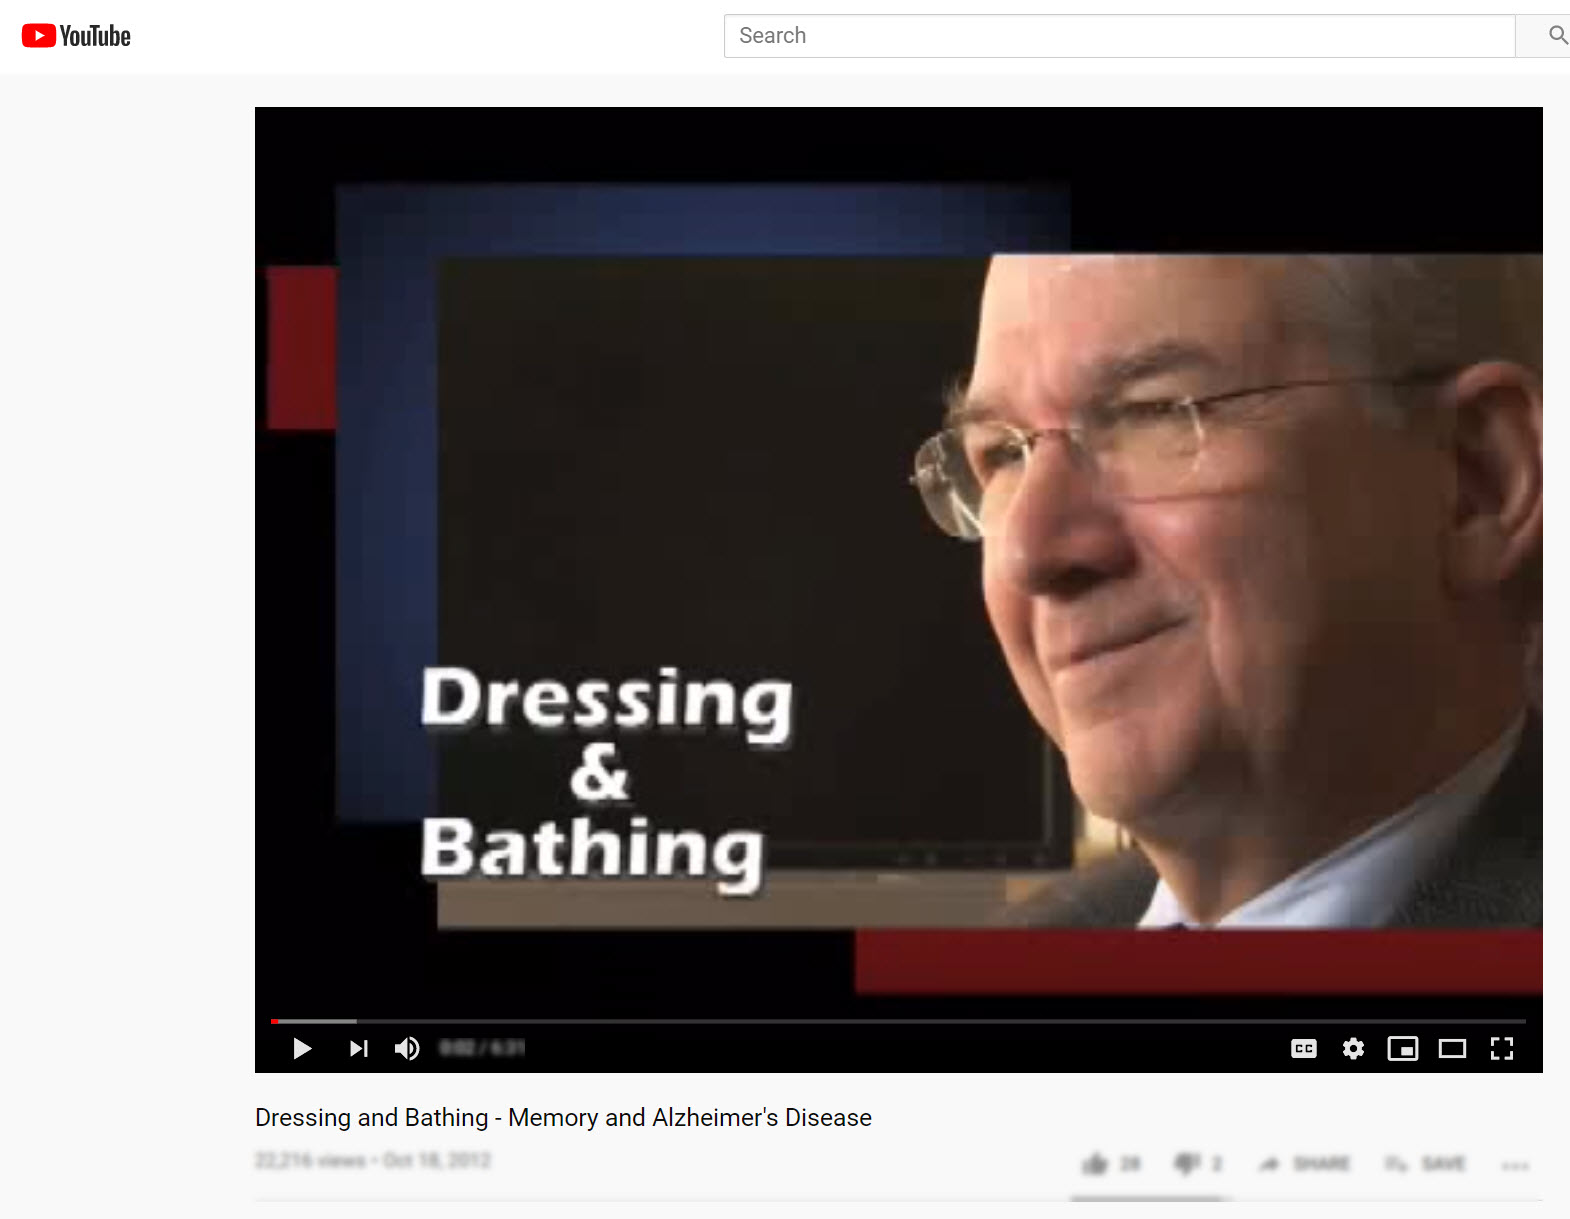 Dressing and Bathing - Memory and Alzheimer's Disease